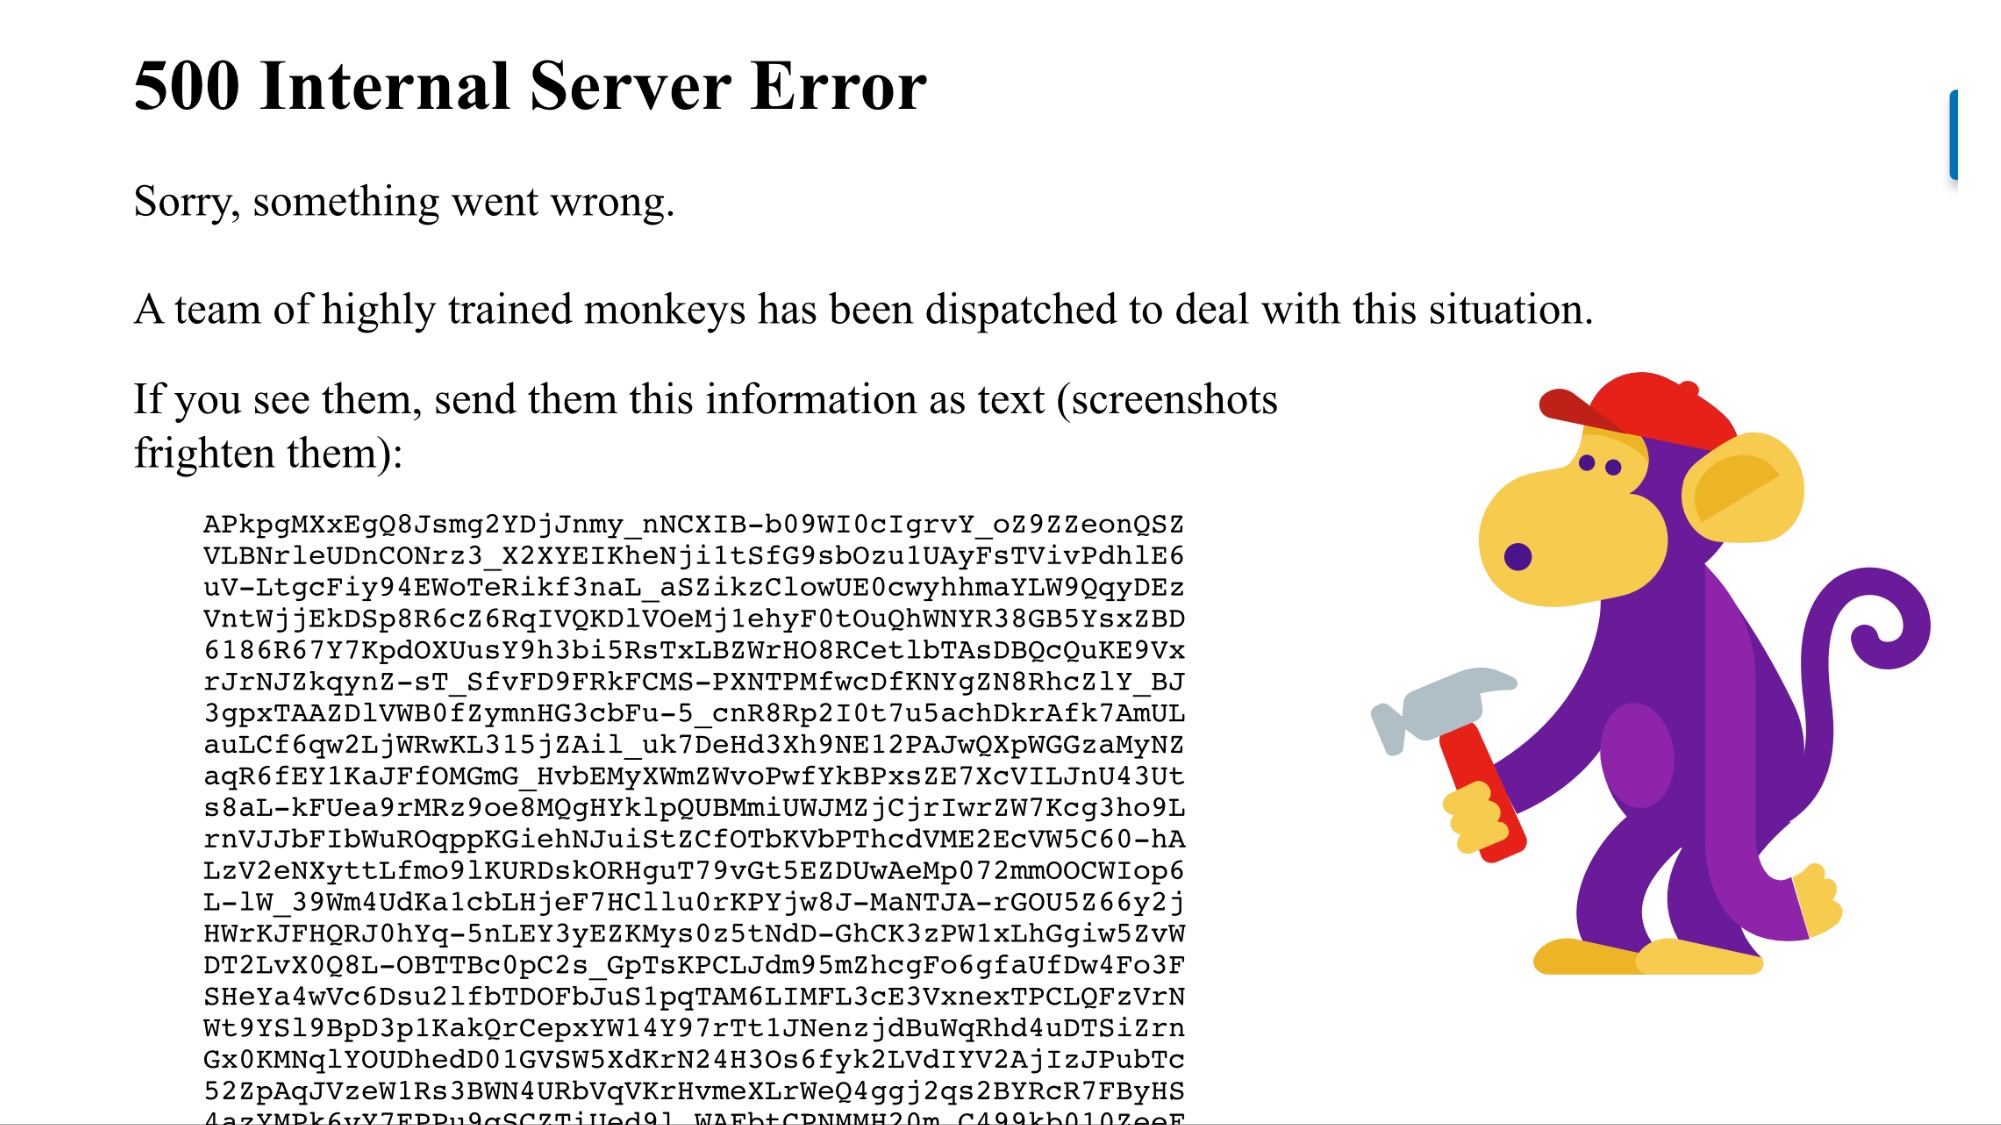 Why Is YouTube Down Right Now? Not Working 2020 – App, TV, Server 503 Error